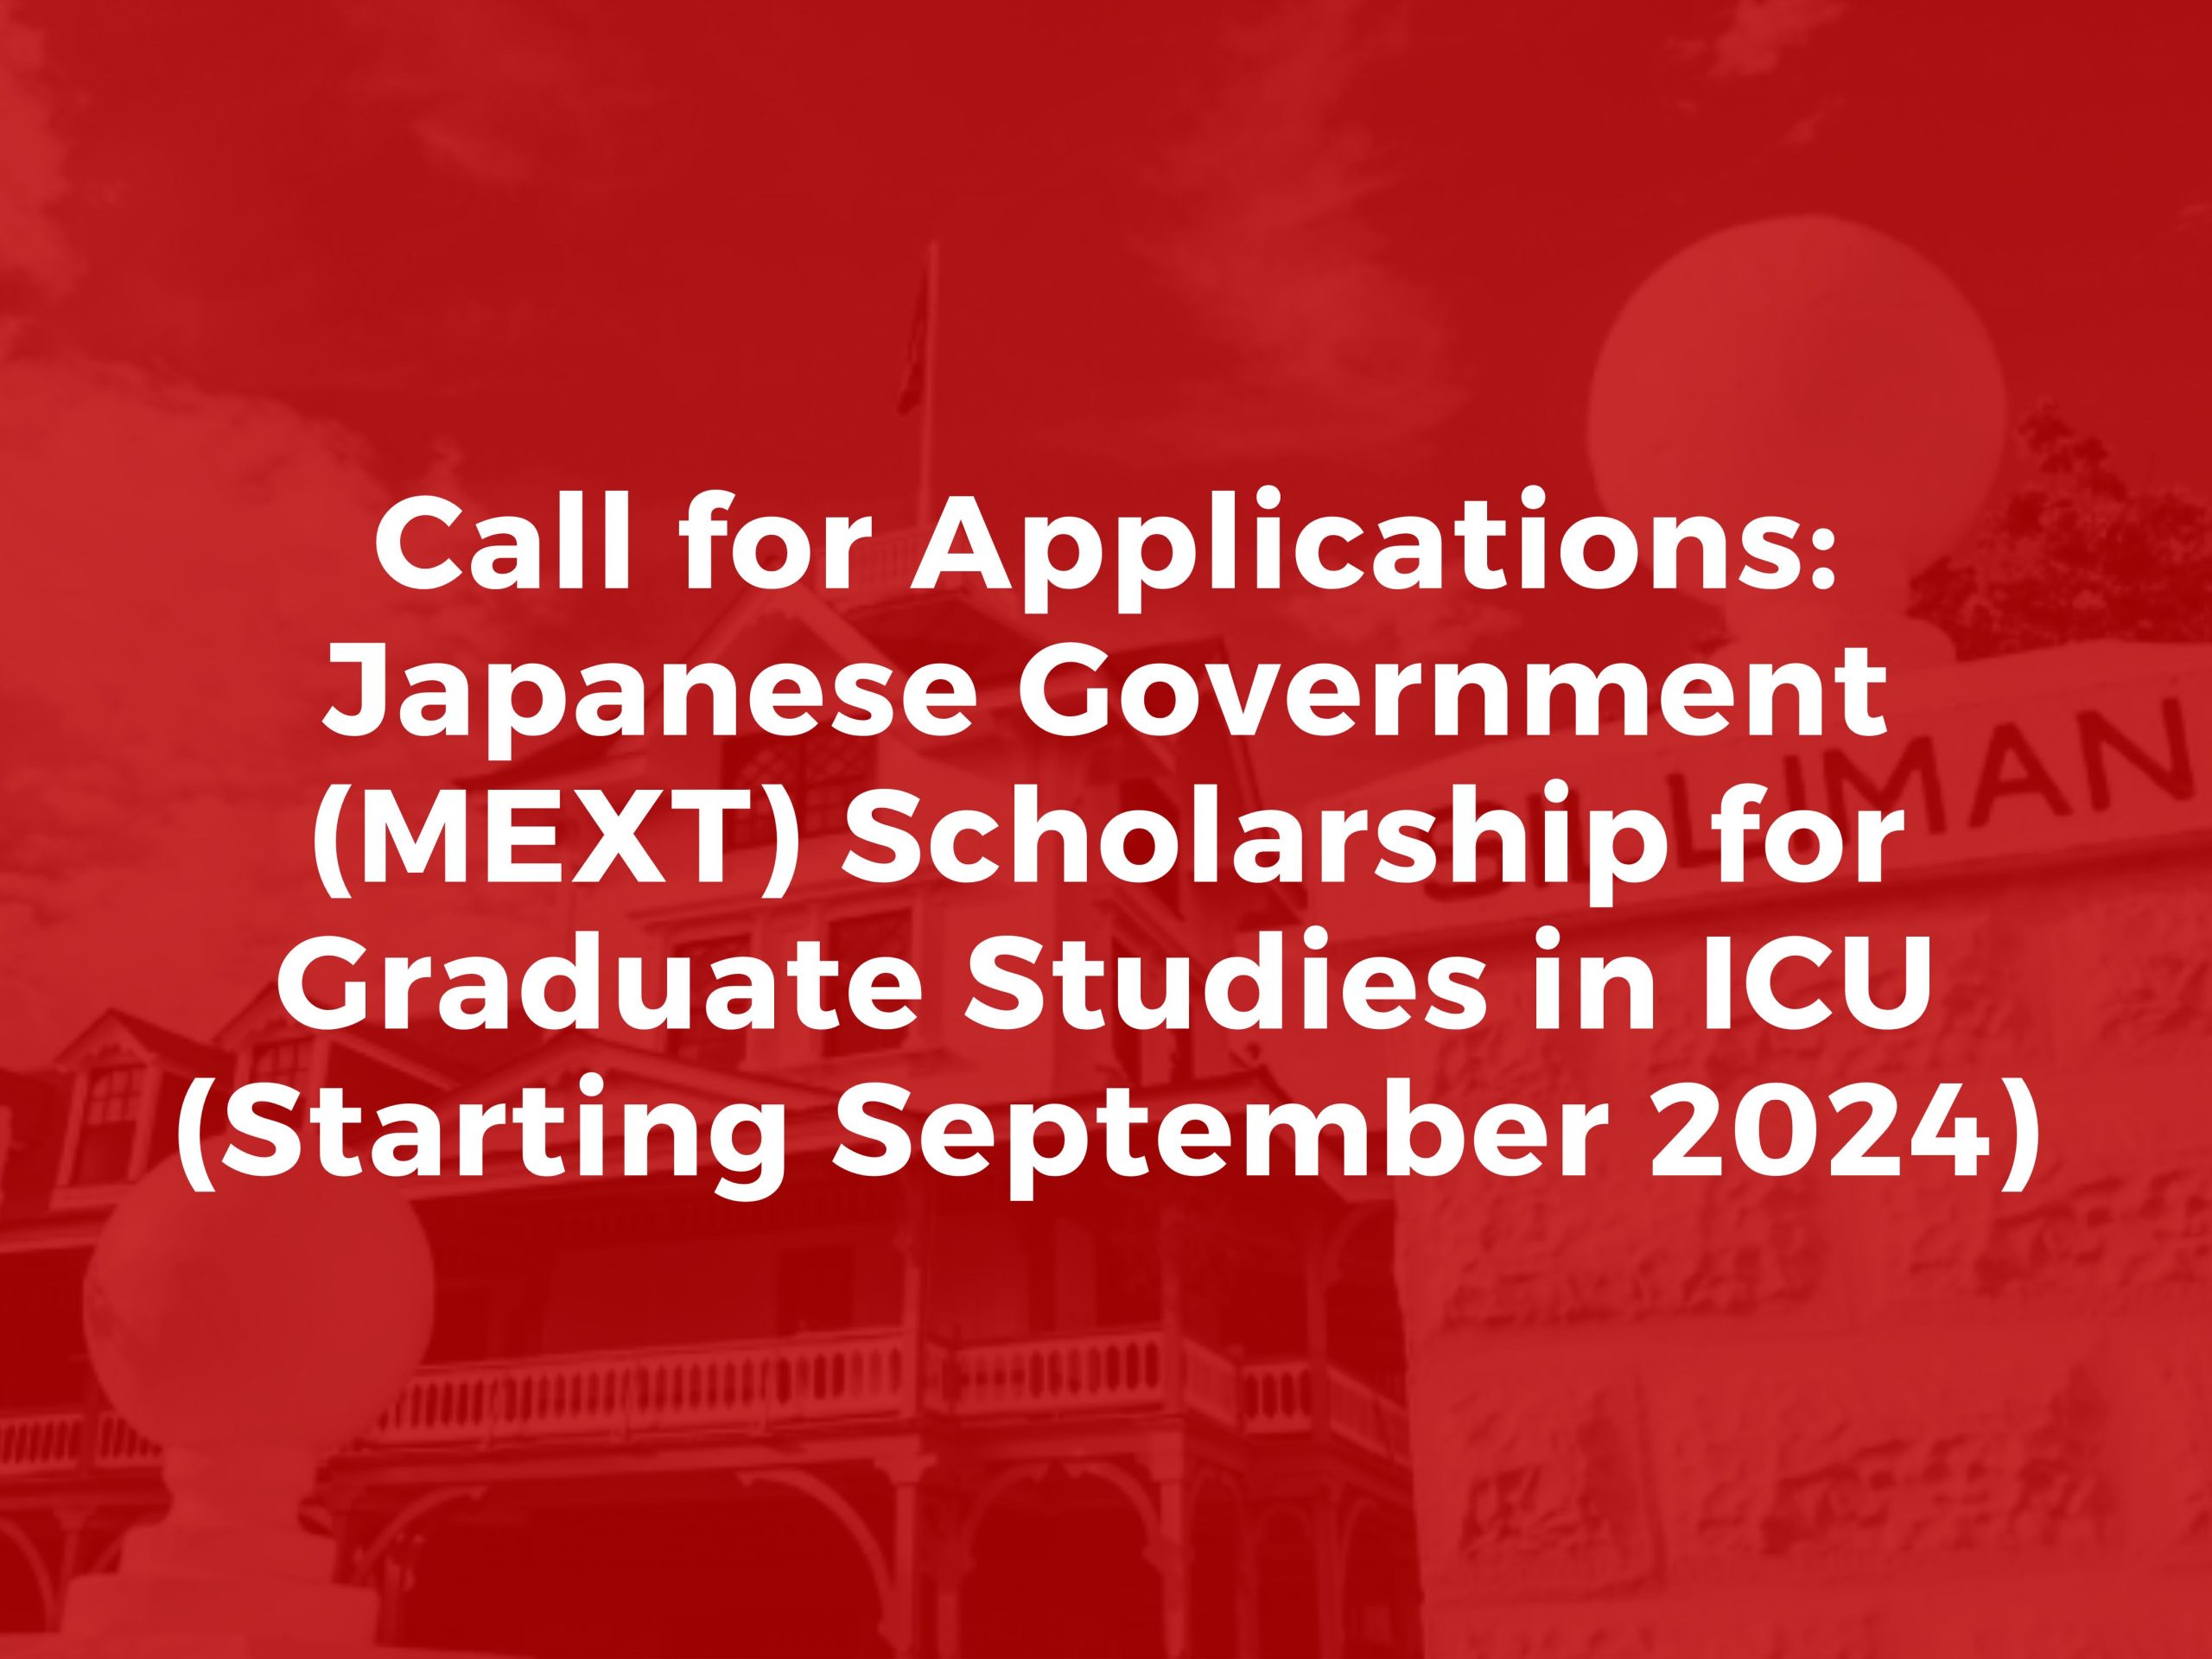 Call for Applications: Japanese Government (MEXT) Scholarship for Graduate Studies in ICU (Starting September 2024)